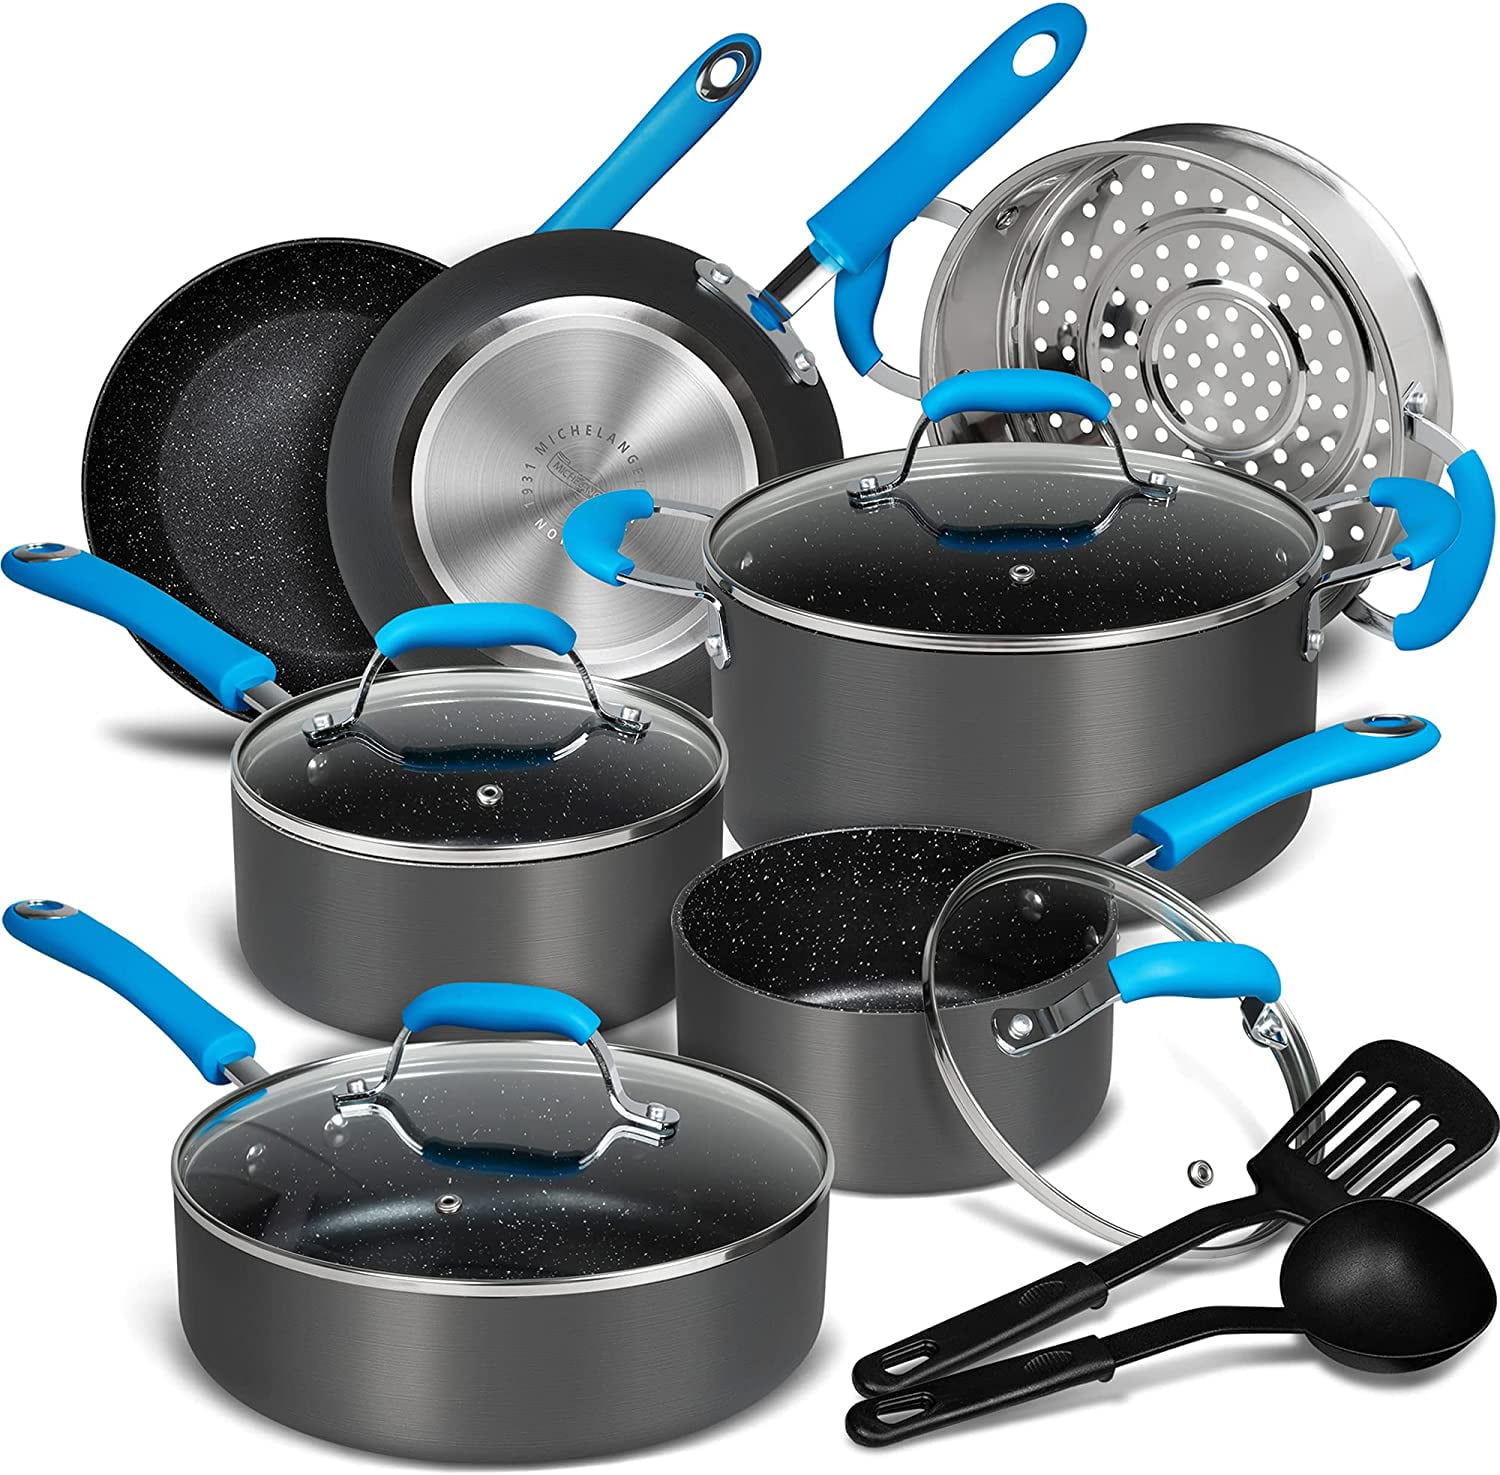 New Product Review! / Michelangelo 10 Piece Nonstick Hard Anodized Cookware  Set. Awesome! 